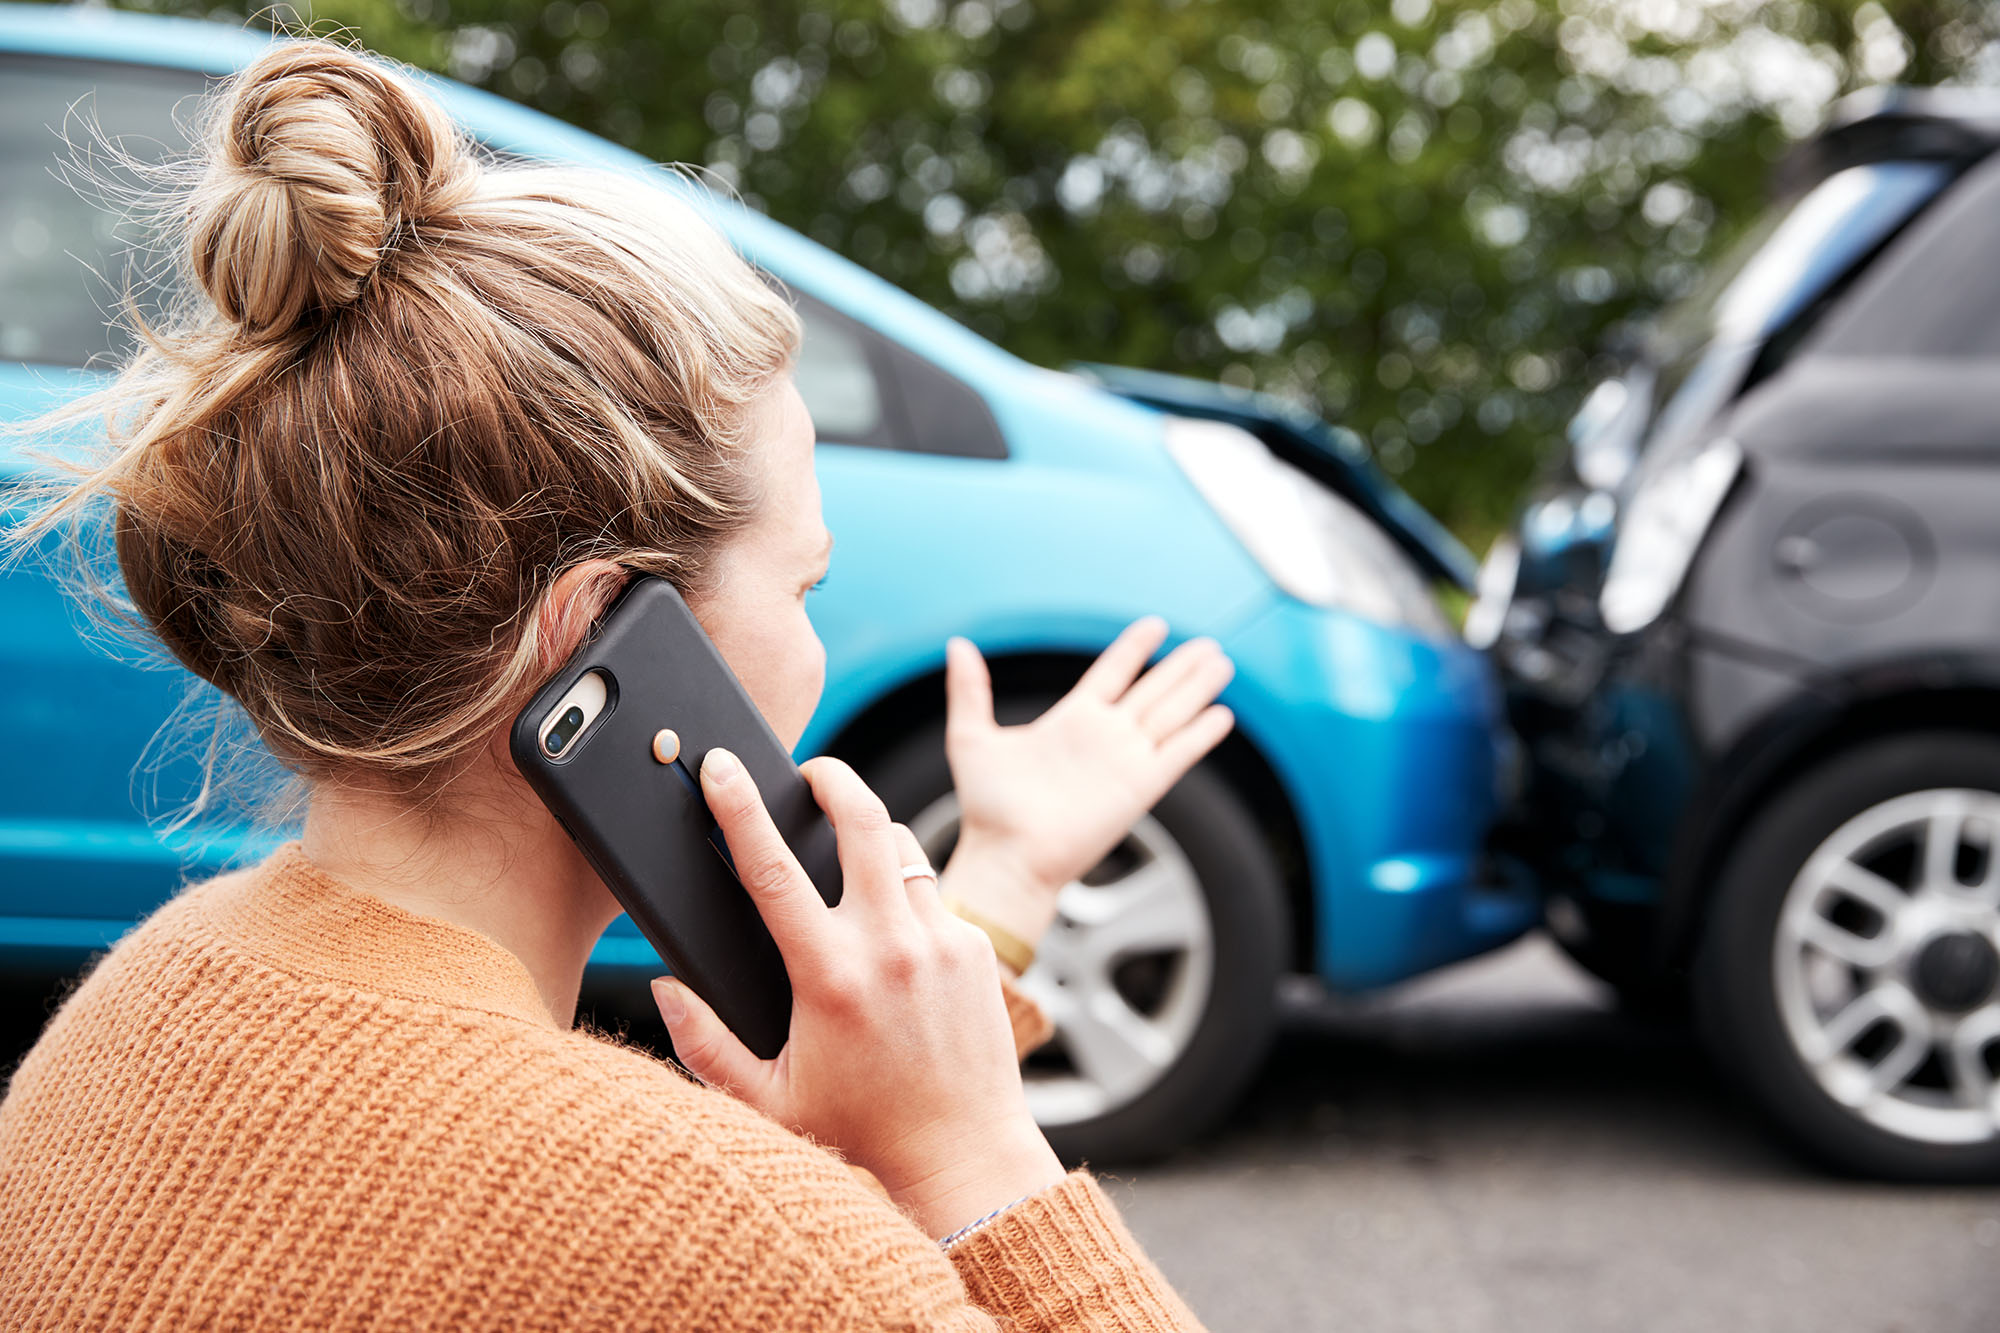 Person speaks on a mobile phone in front of a fender bender